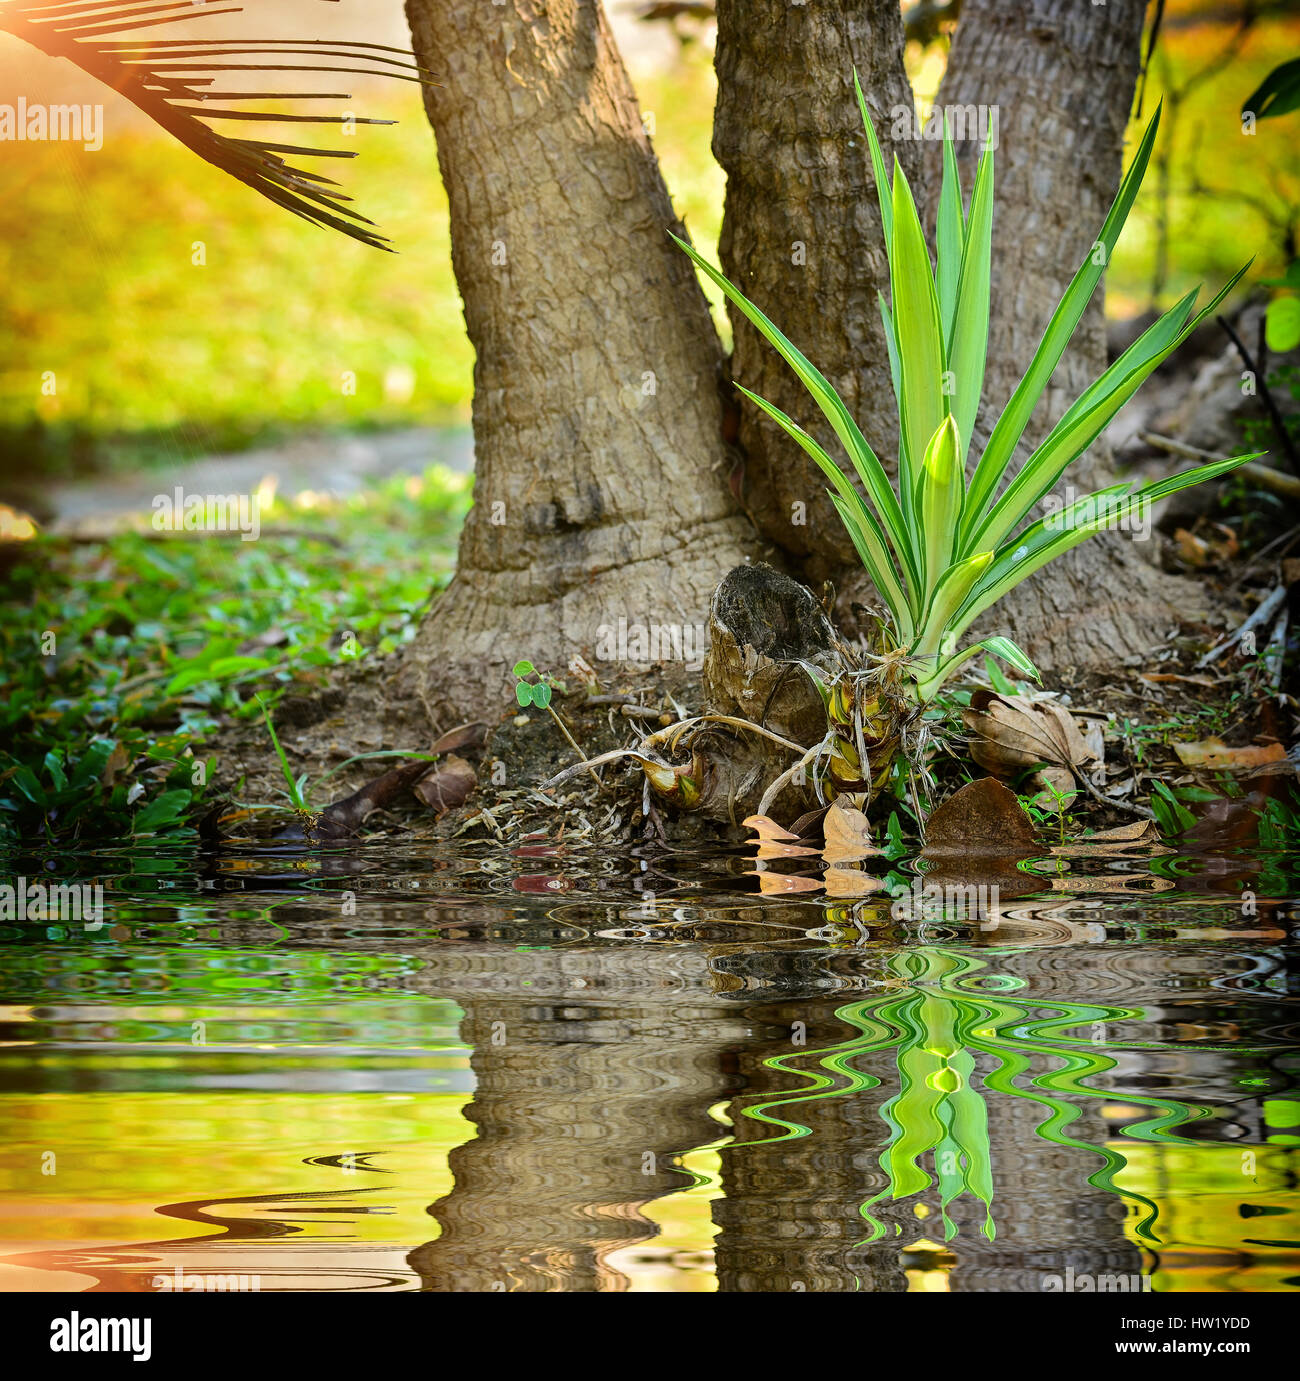 Young Dracaena Marginata with reflect in water Stock Photo